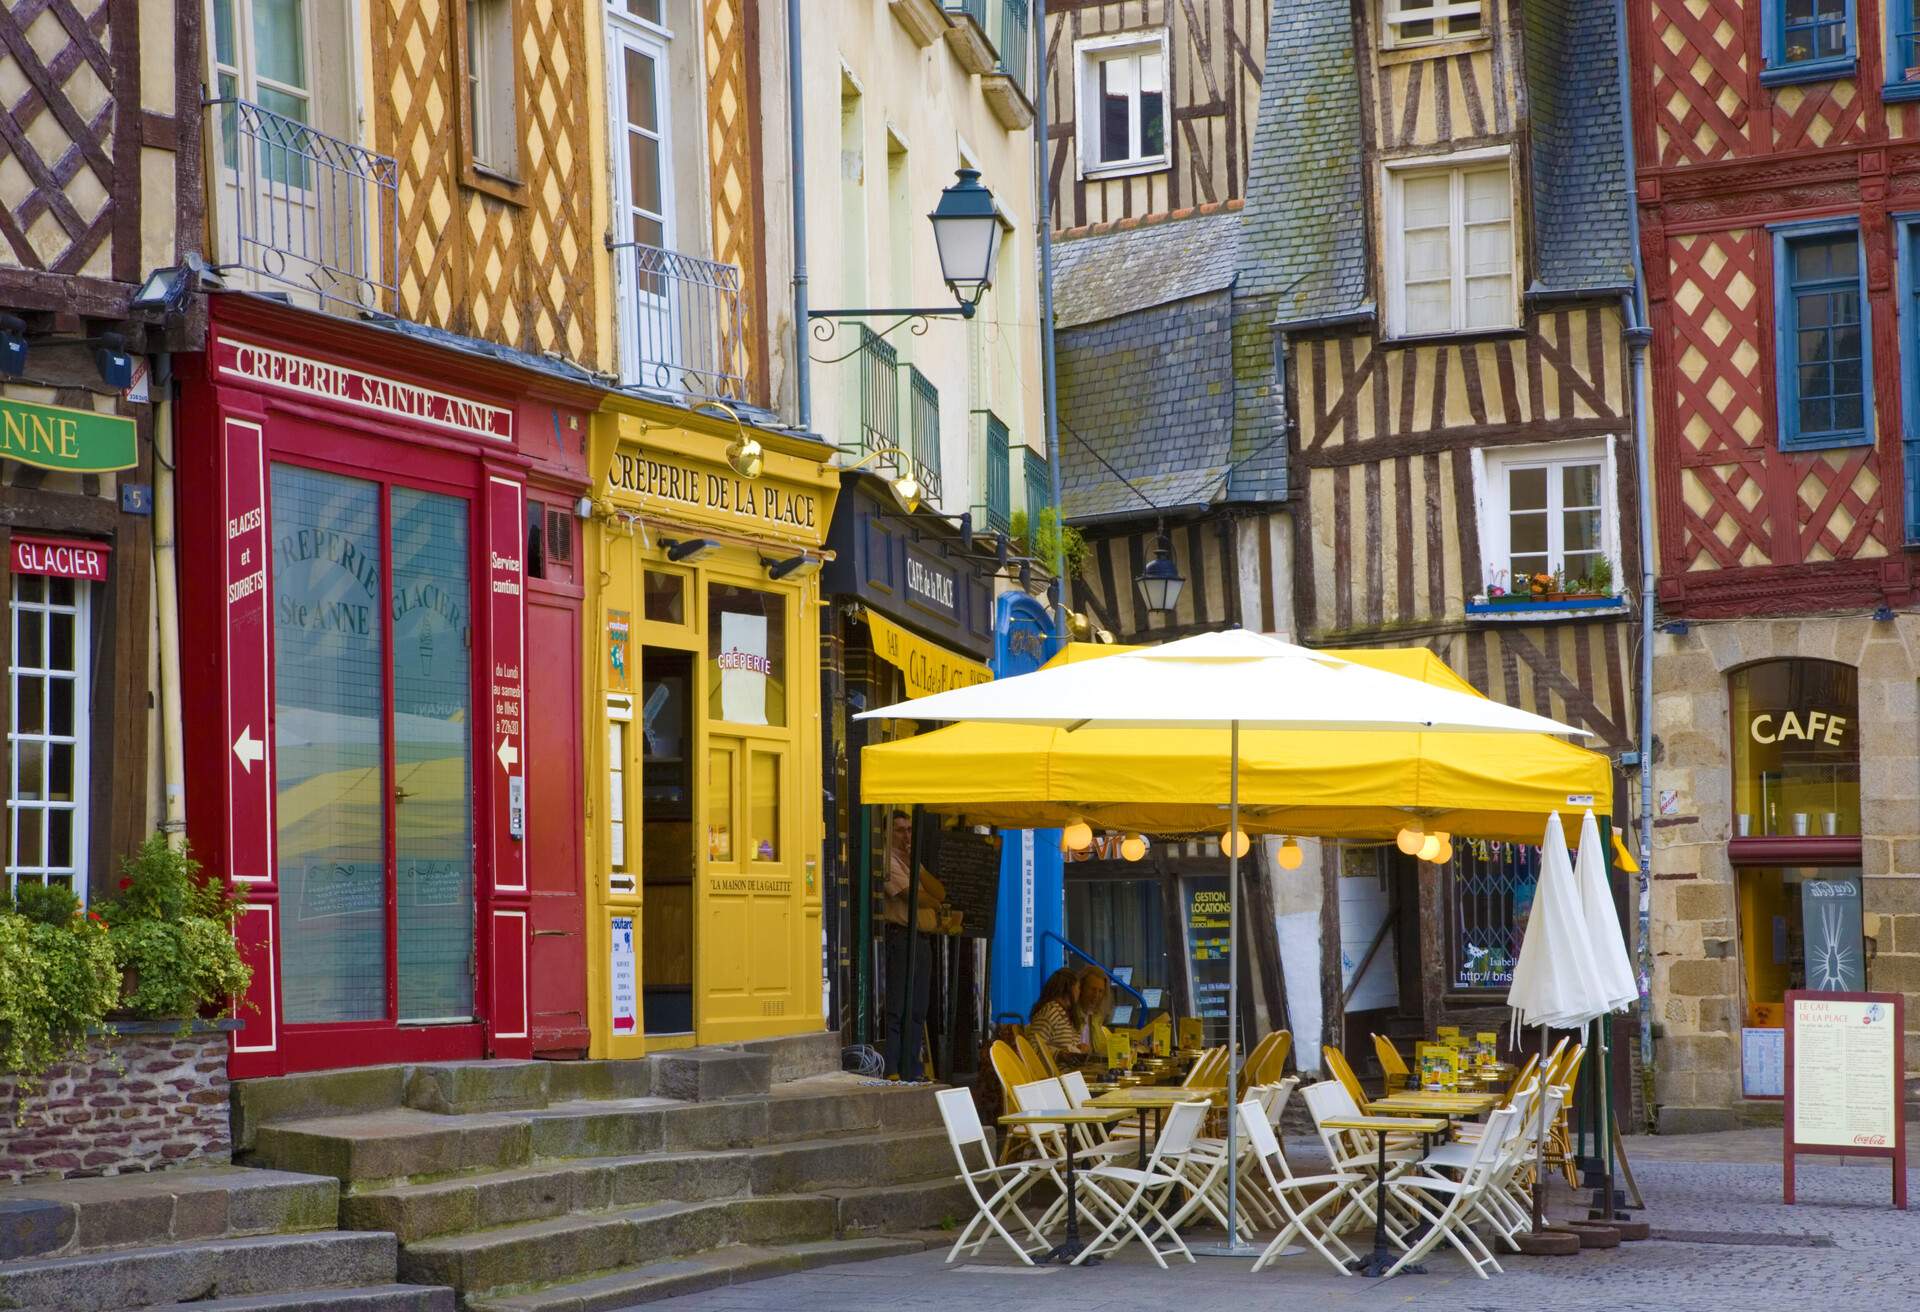 Colourful shops and cafes with outdoor seating under yellow umbrellas on the sidewalk.